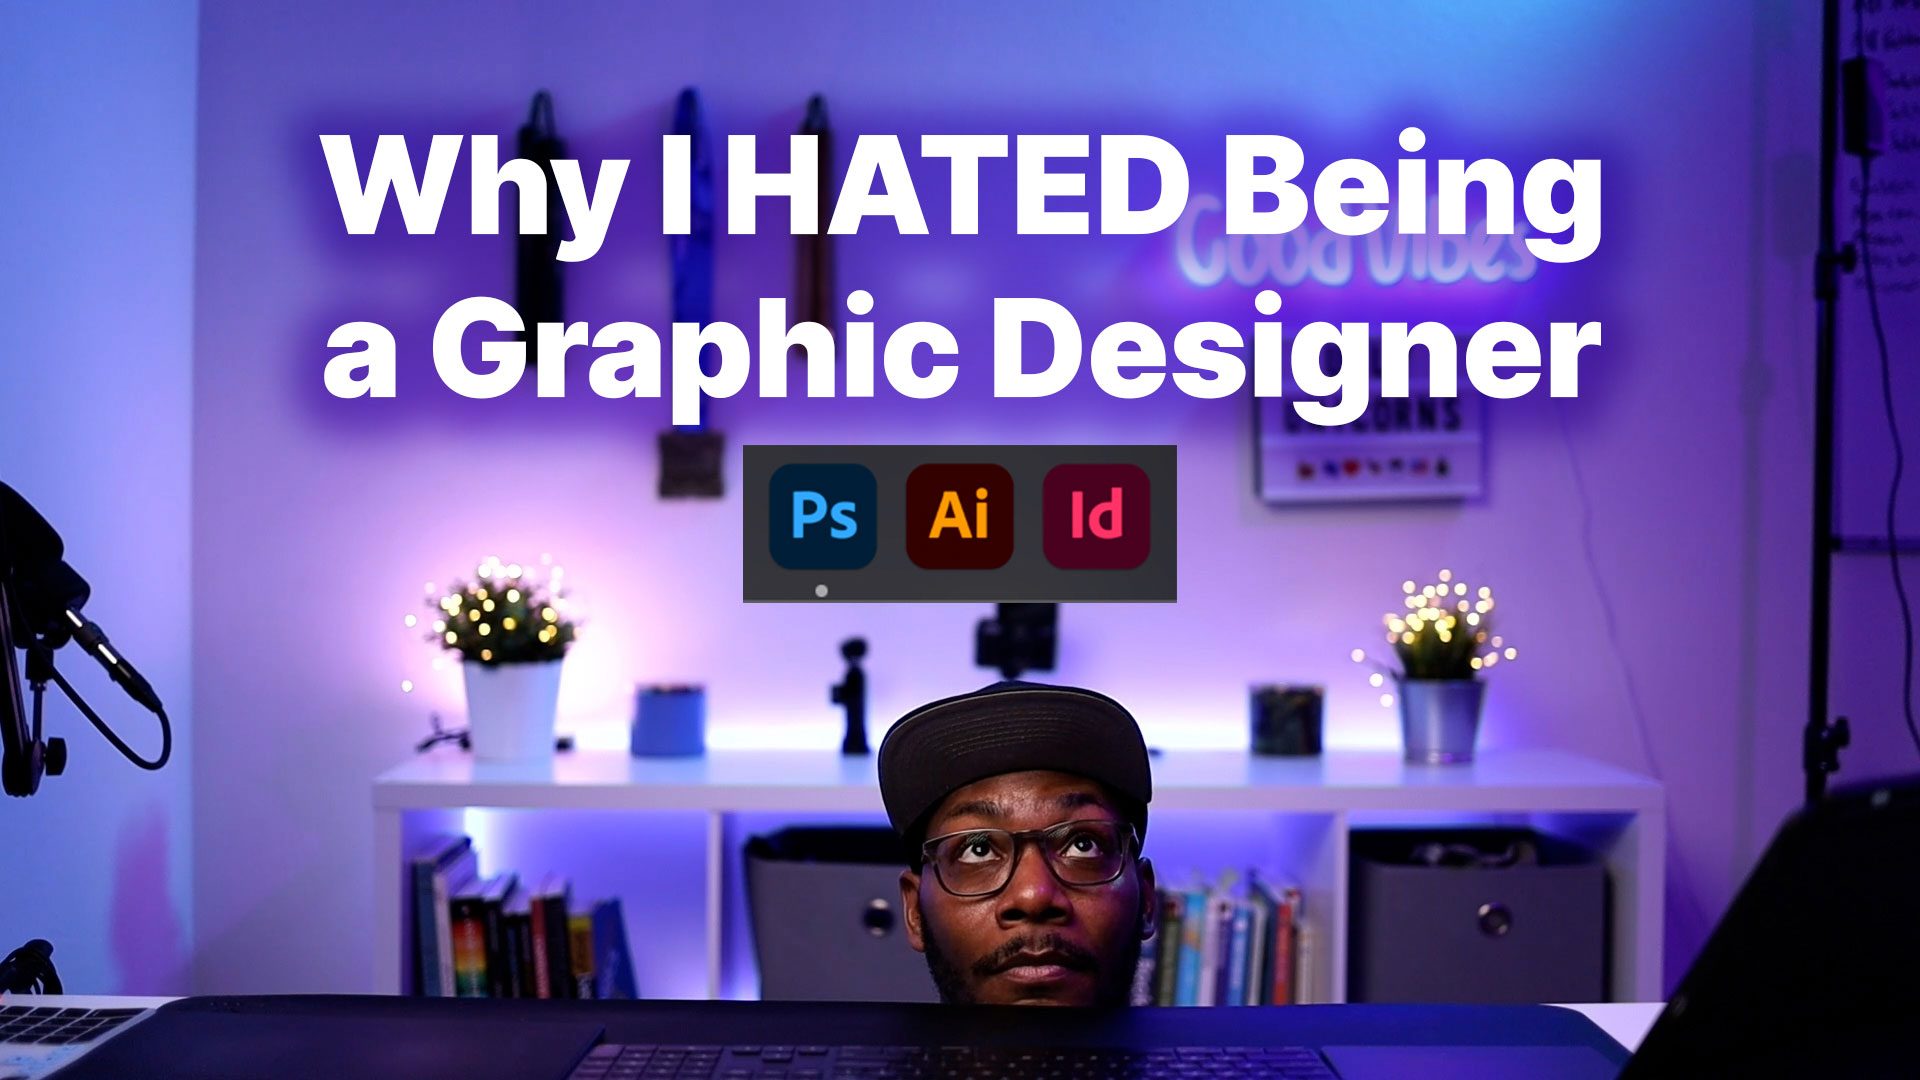 Why-I-HATED-Being-a-Graphic-Designer-UX-Design